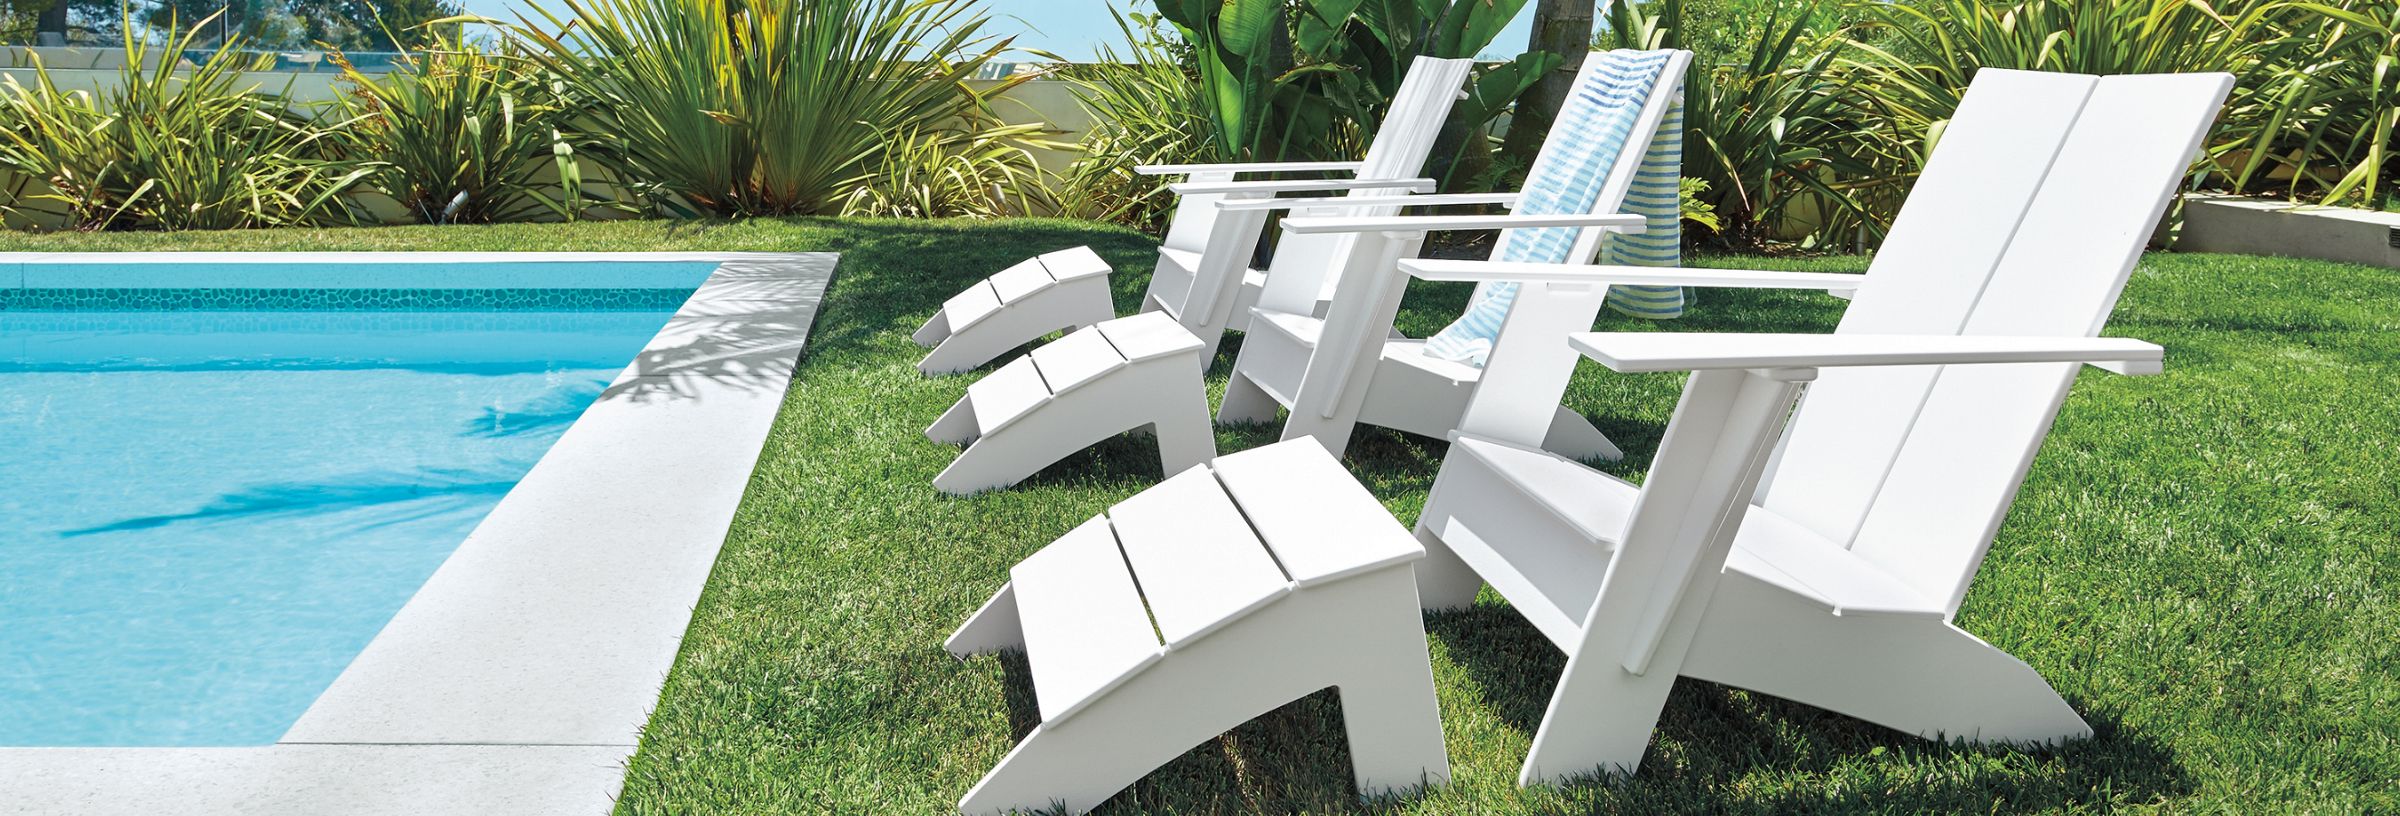 Commercial Outdoor Lounge Furniture